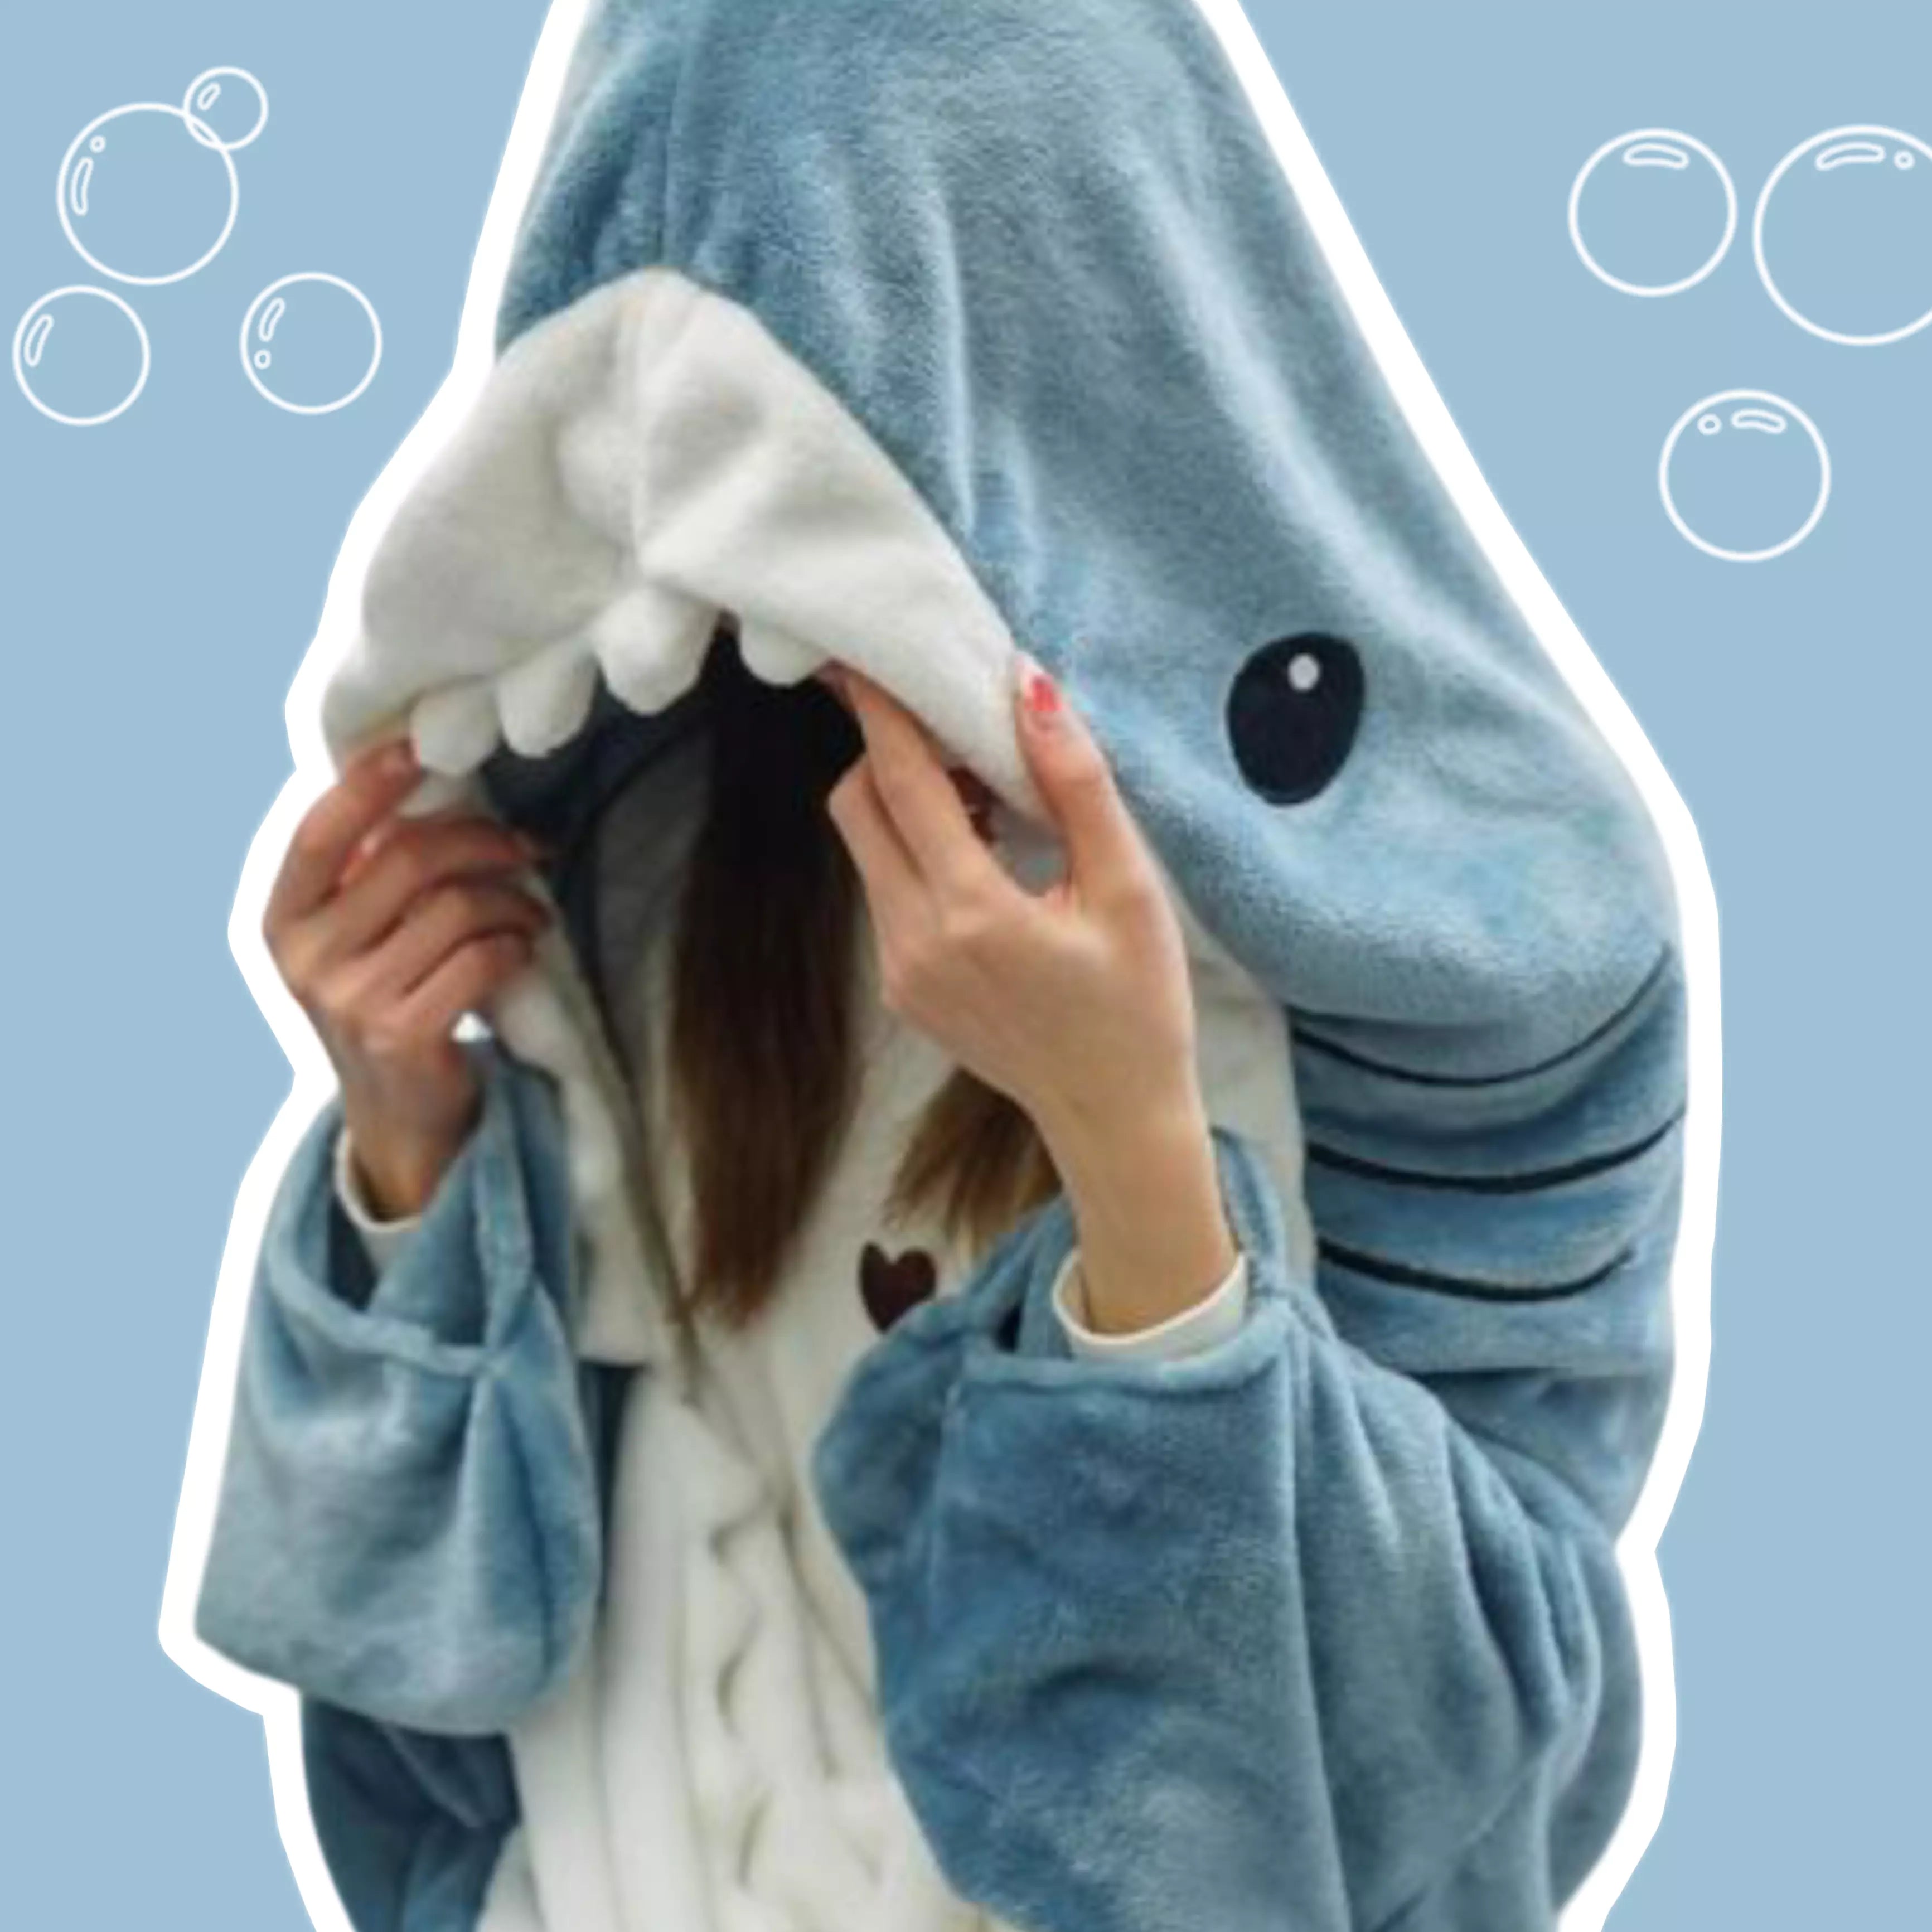 Shark Blankie – Becomes the World’s Coziest, Comfiest and Cutest Shark!